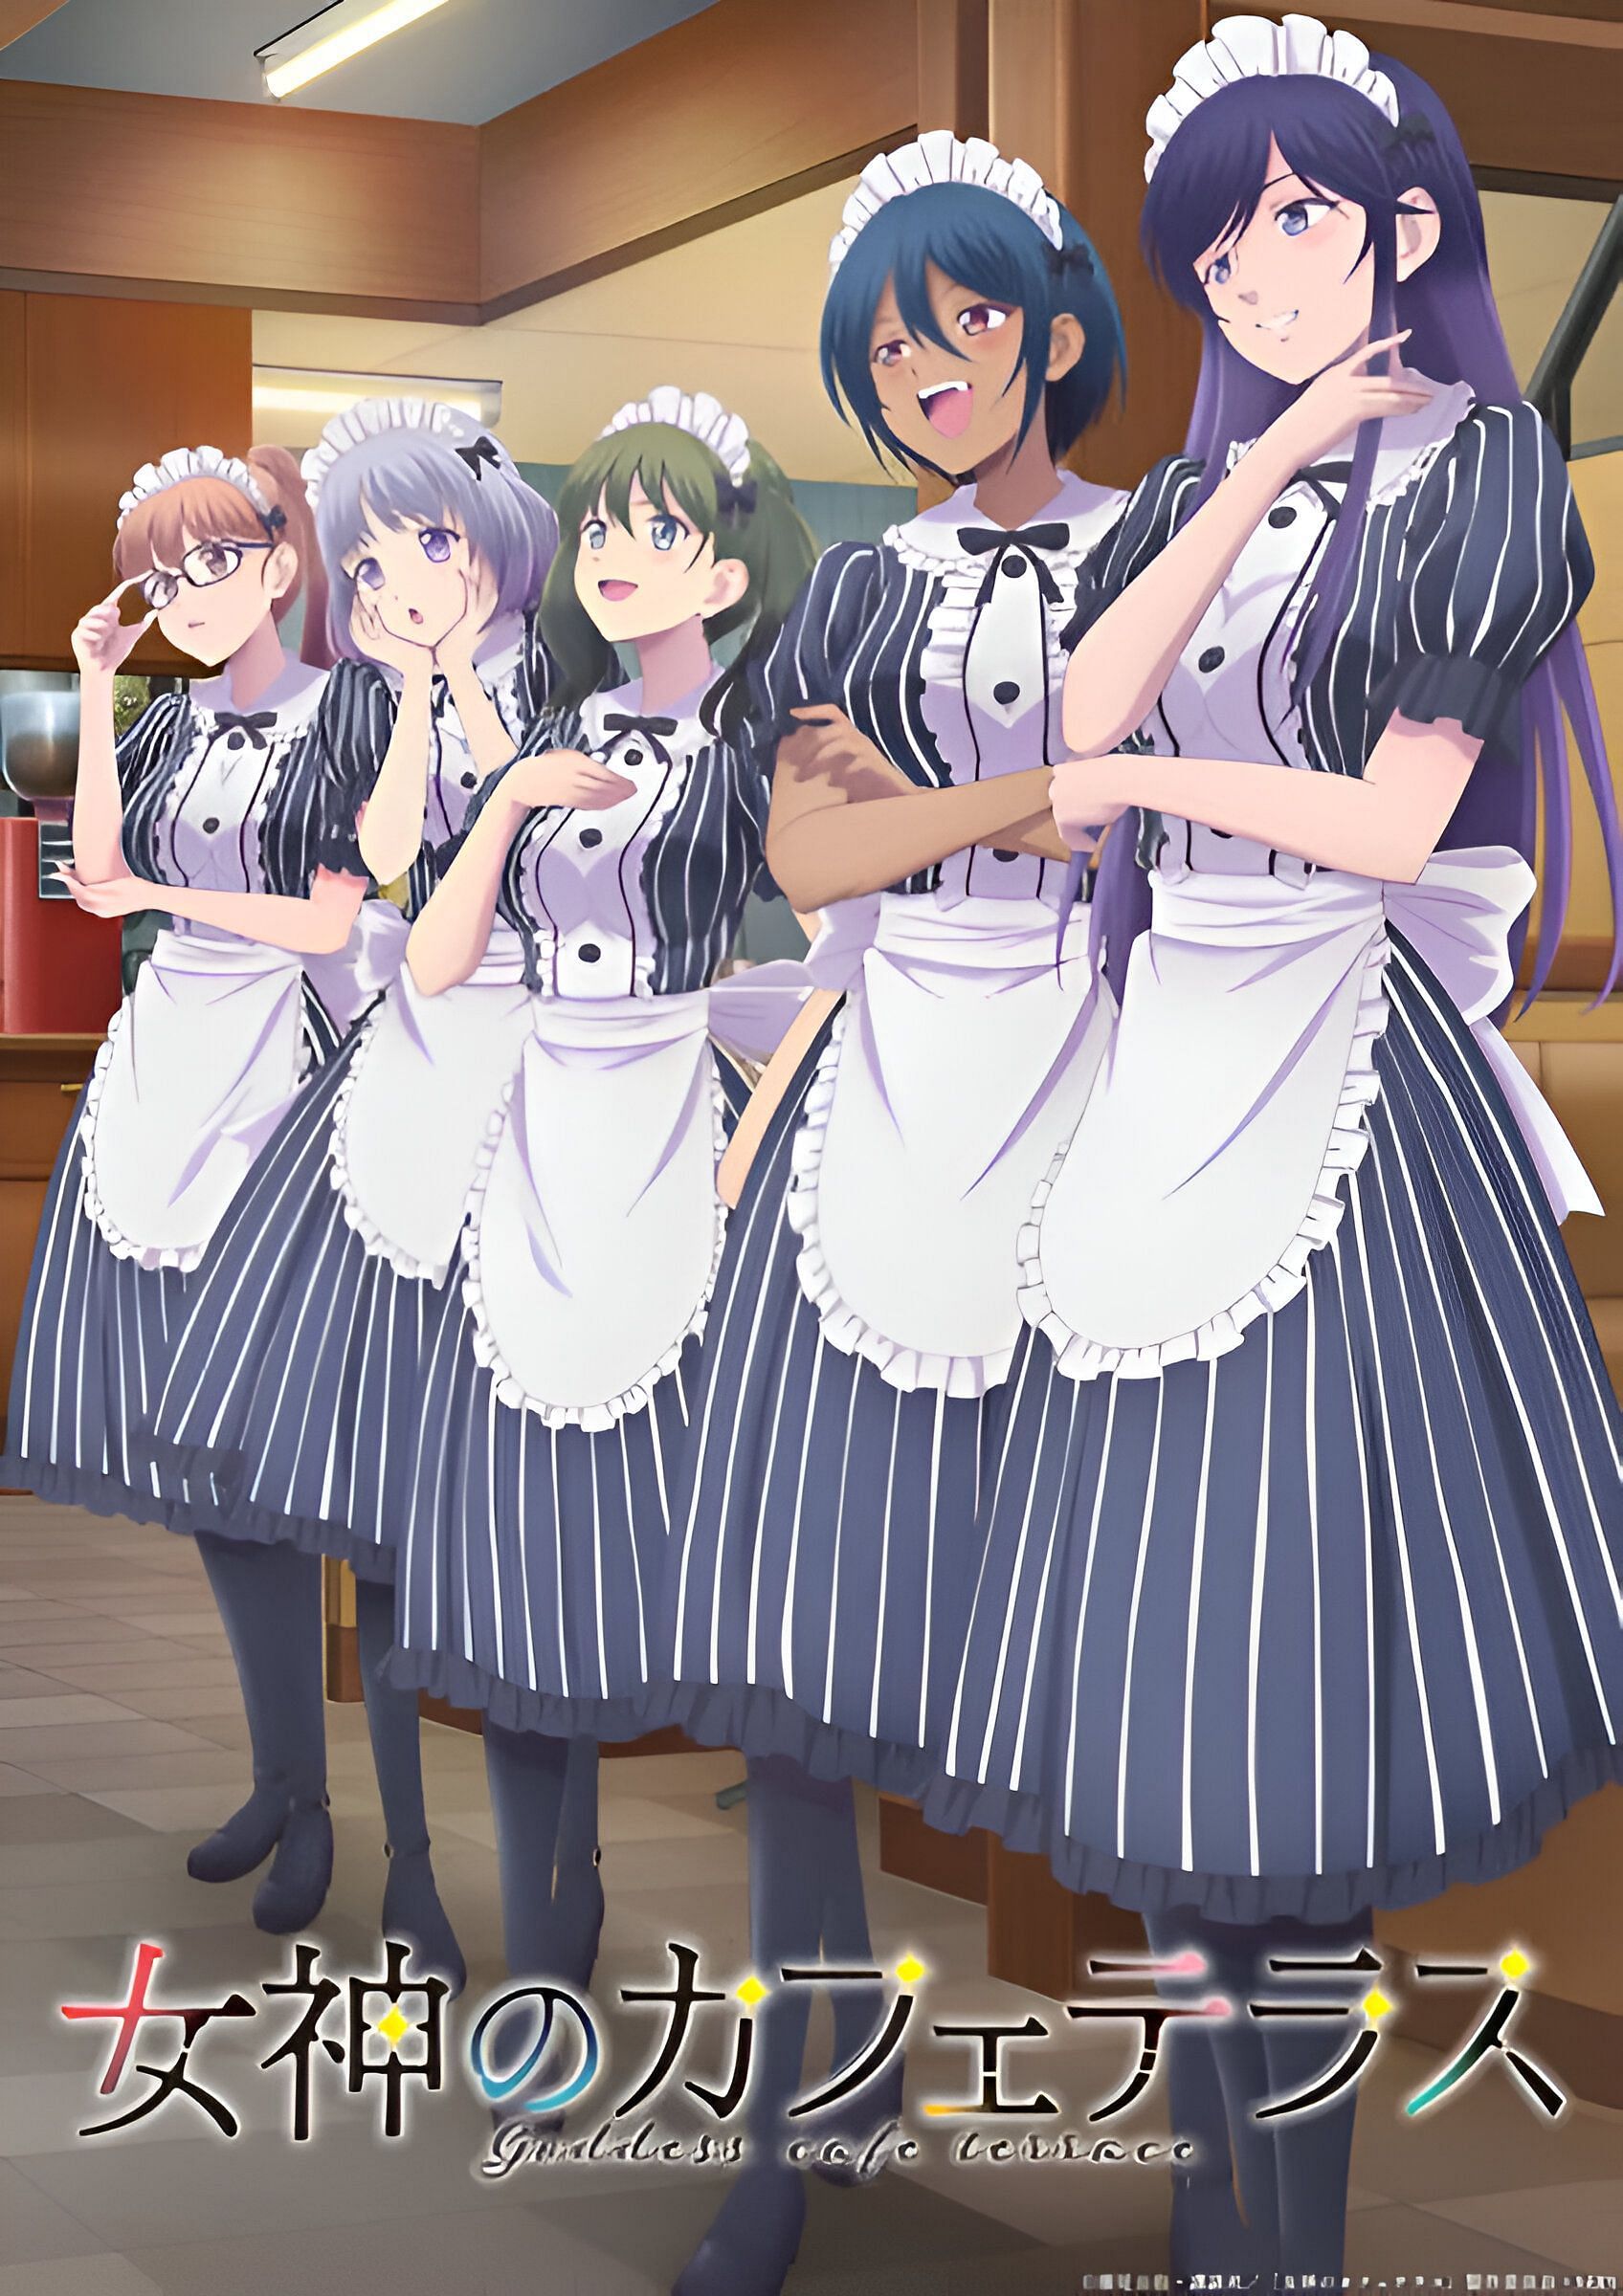 The rival caf&eacute; girls as seen in the Caf&eacute; Terrace and Its Goddesses season 2 teaser visual (Image via Tezuka Production)